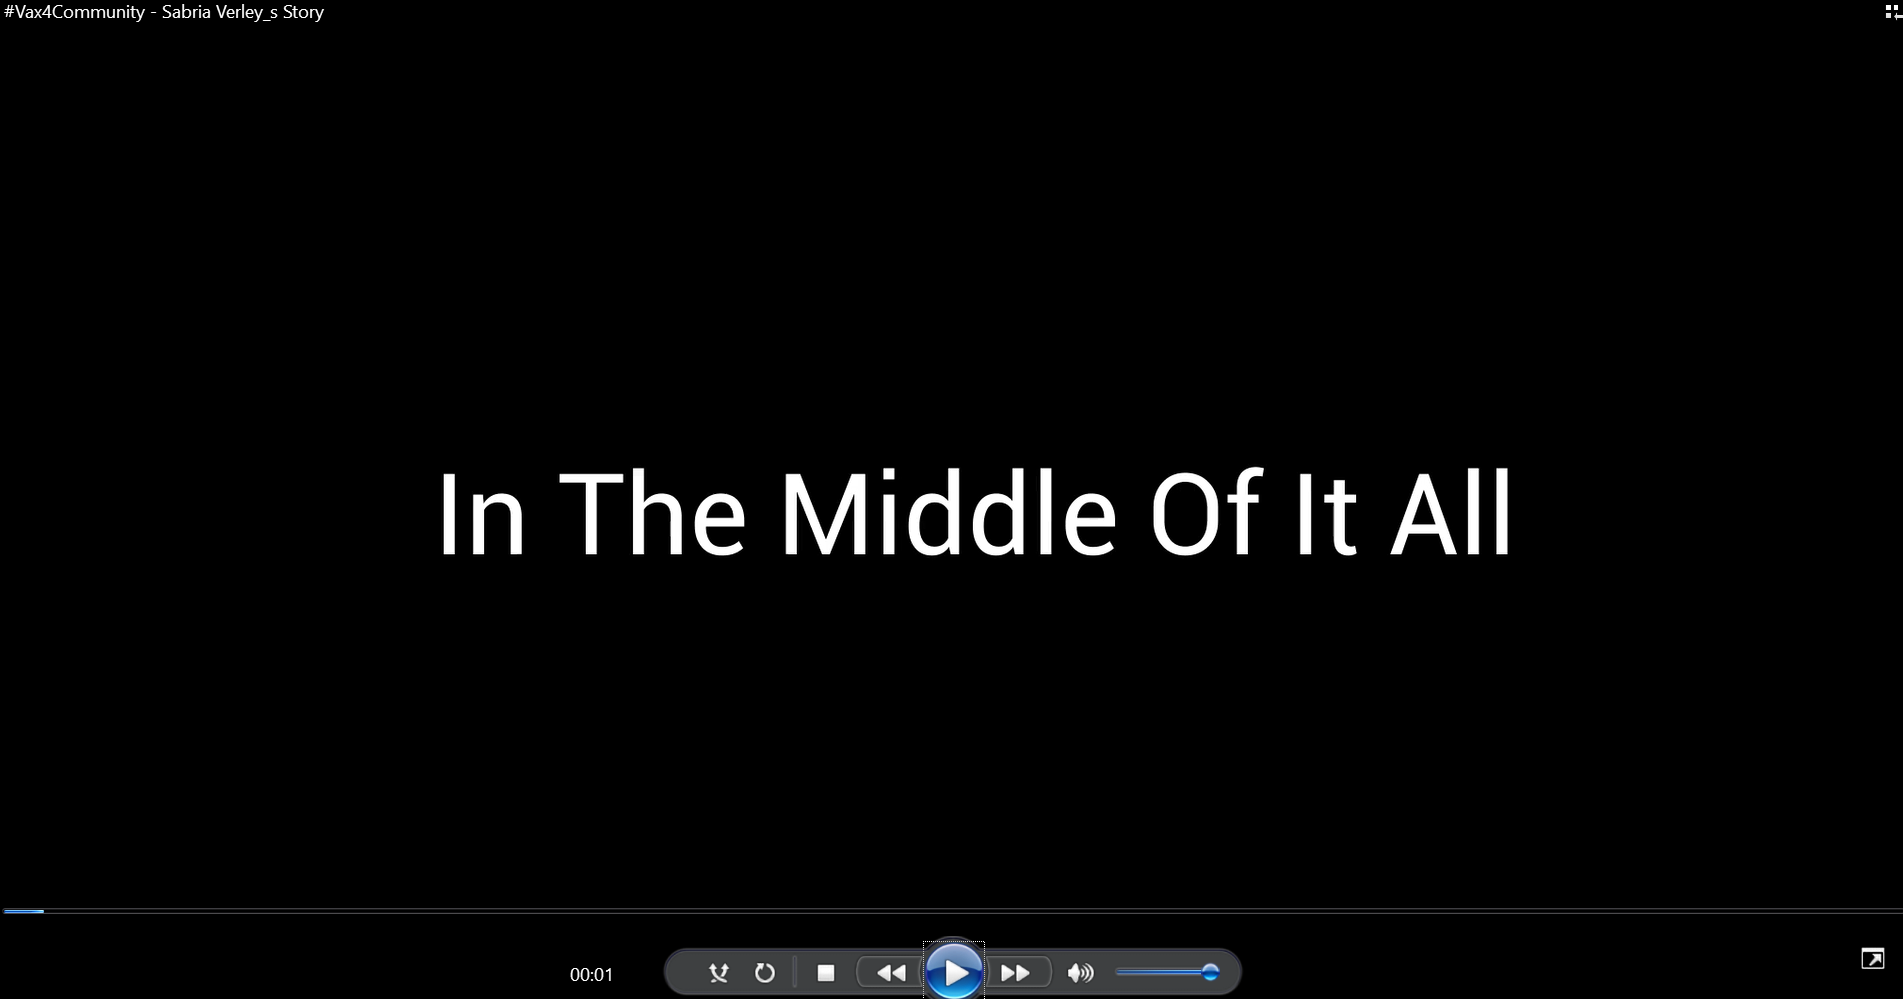 Video title reads "In the Middle of It All"